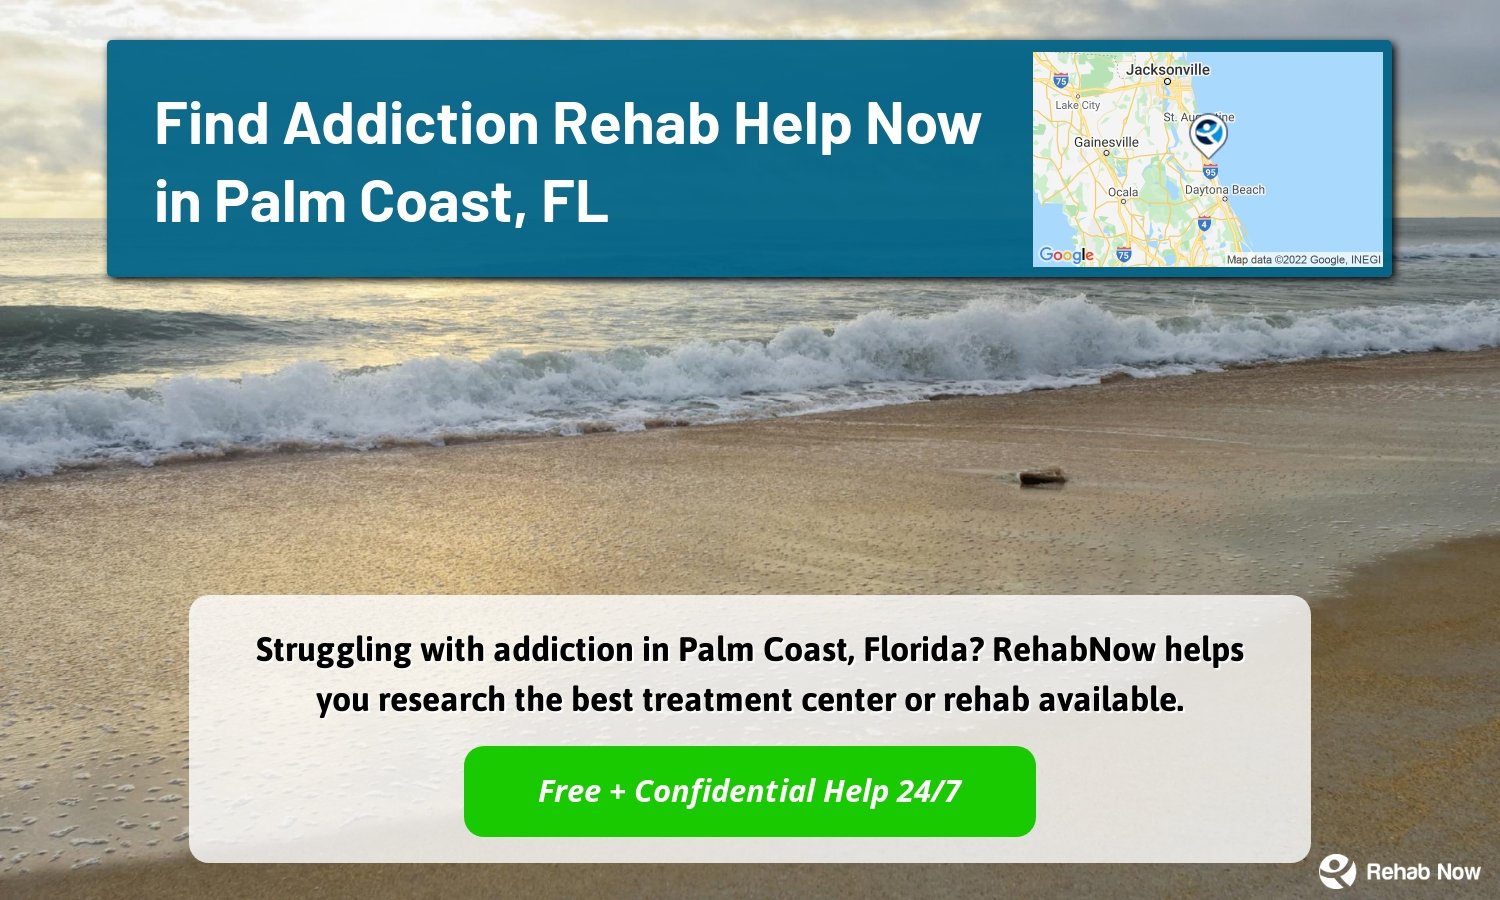 Struggling with addiction in Palm Coast, Florida? RehabNow helps you research the best treatment center or rehab available.